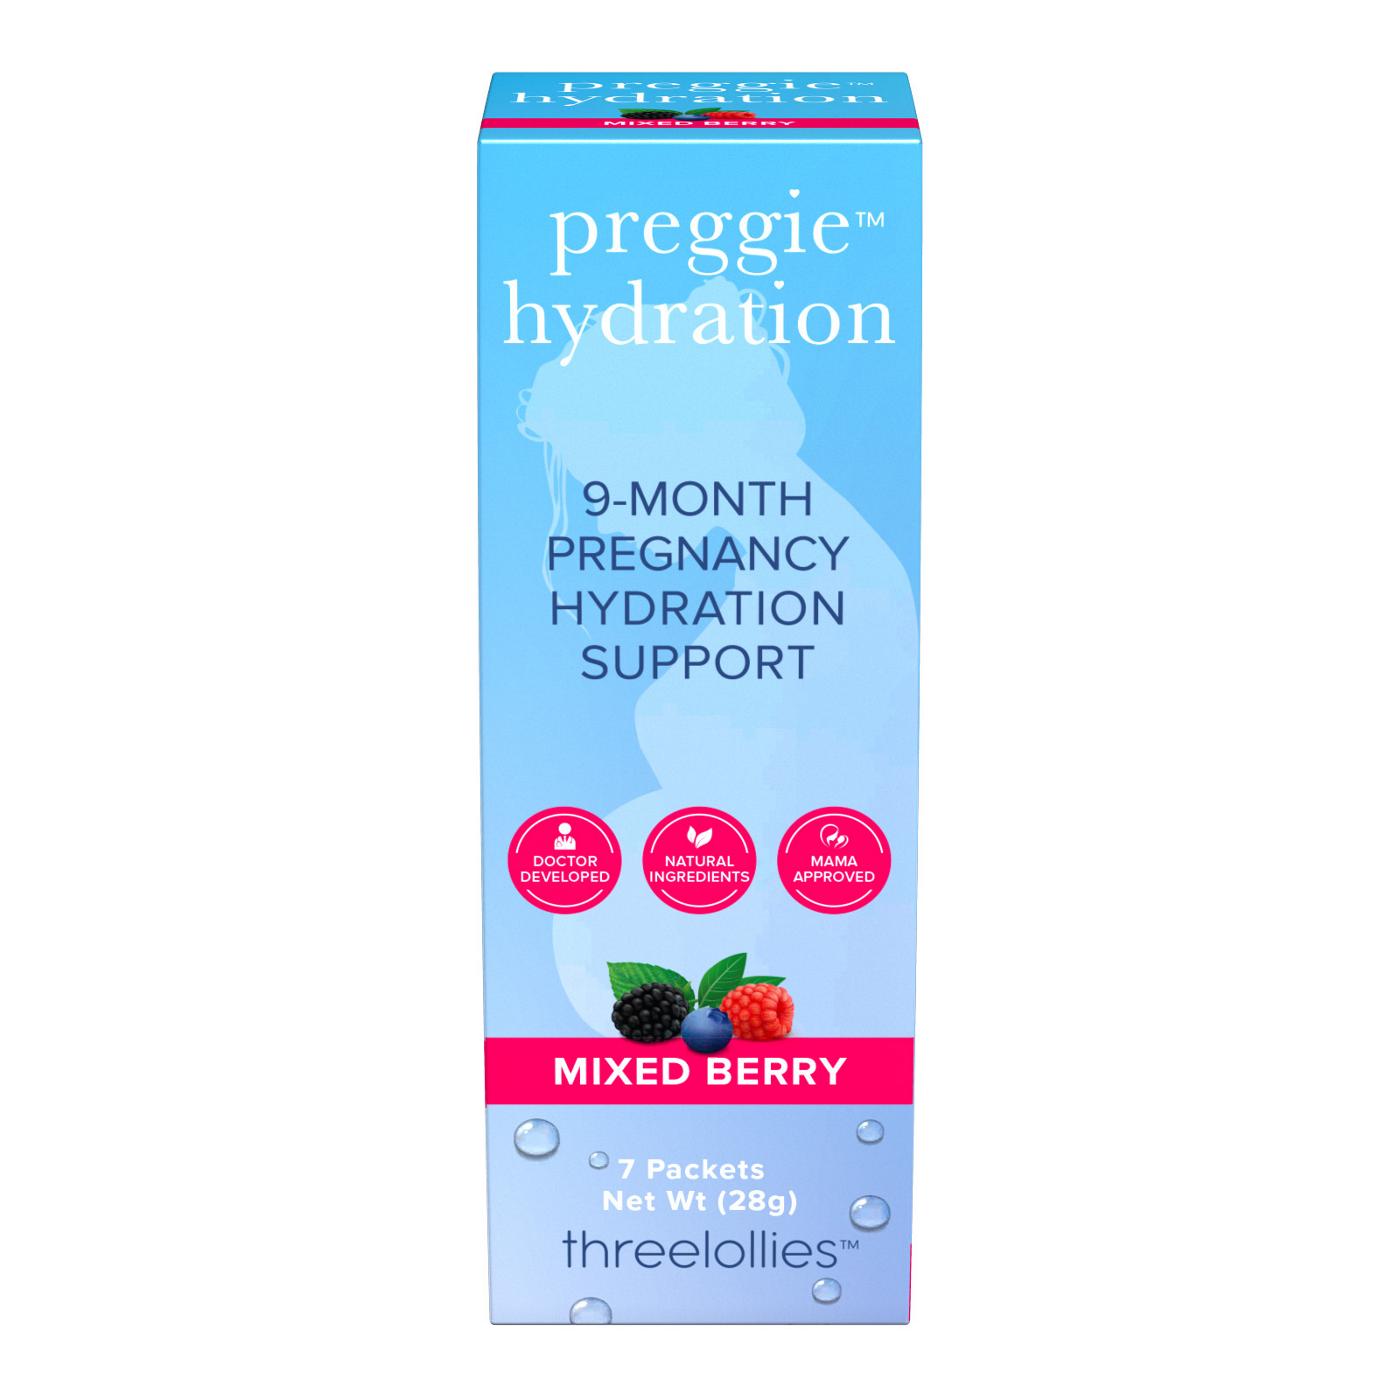 Preggie Hydration 9-Month Pregnancy Hydration Support Packets - Mixed Berry; image 1 of 3